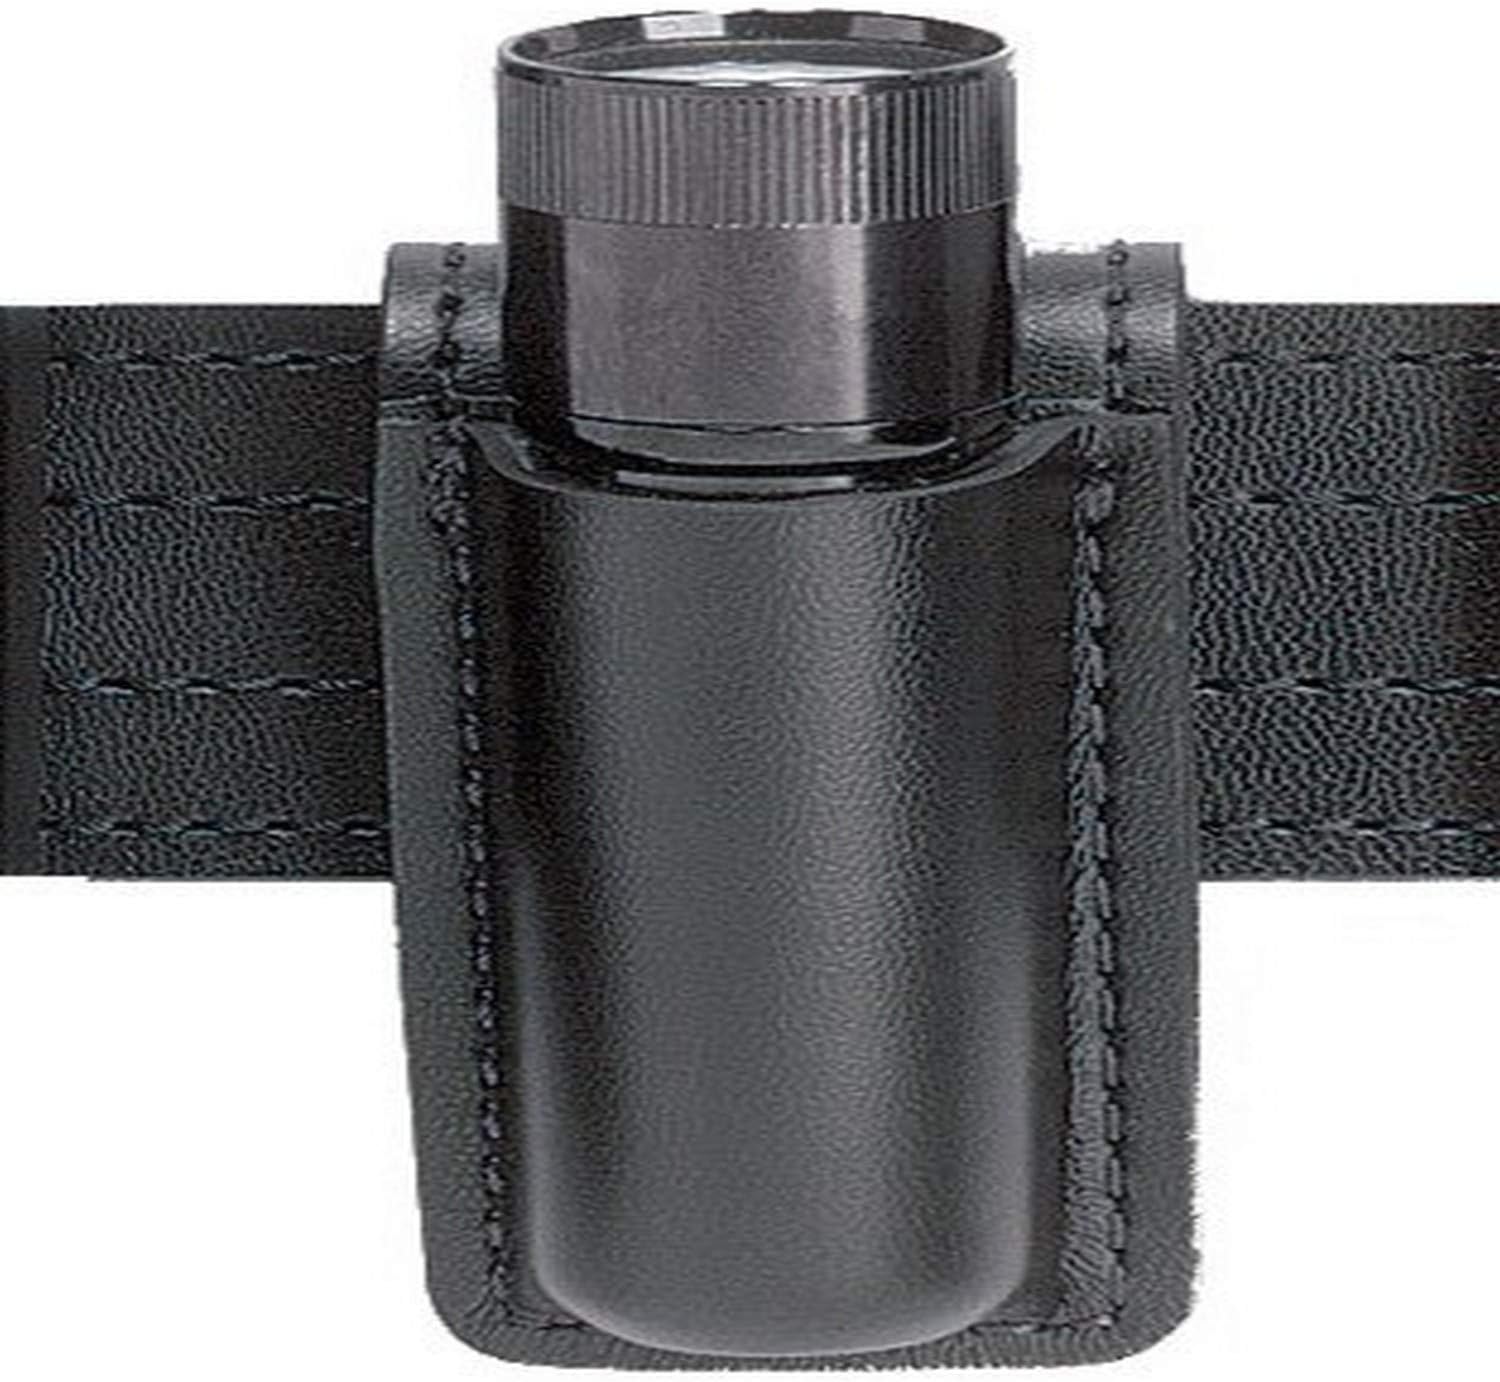 safariland 306 Open Top Flashlight Carrier, Plain Black, for Streamlight Stinger with Poly Grip